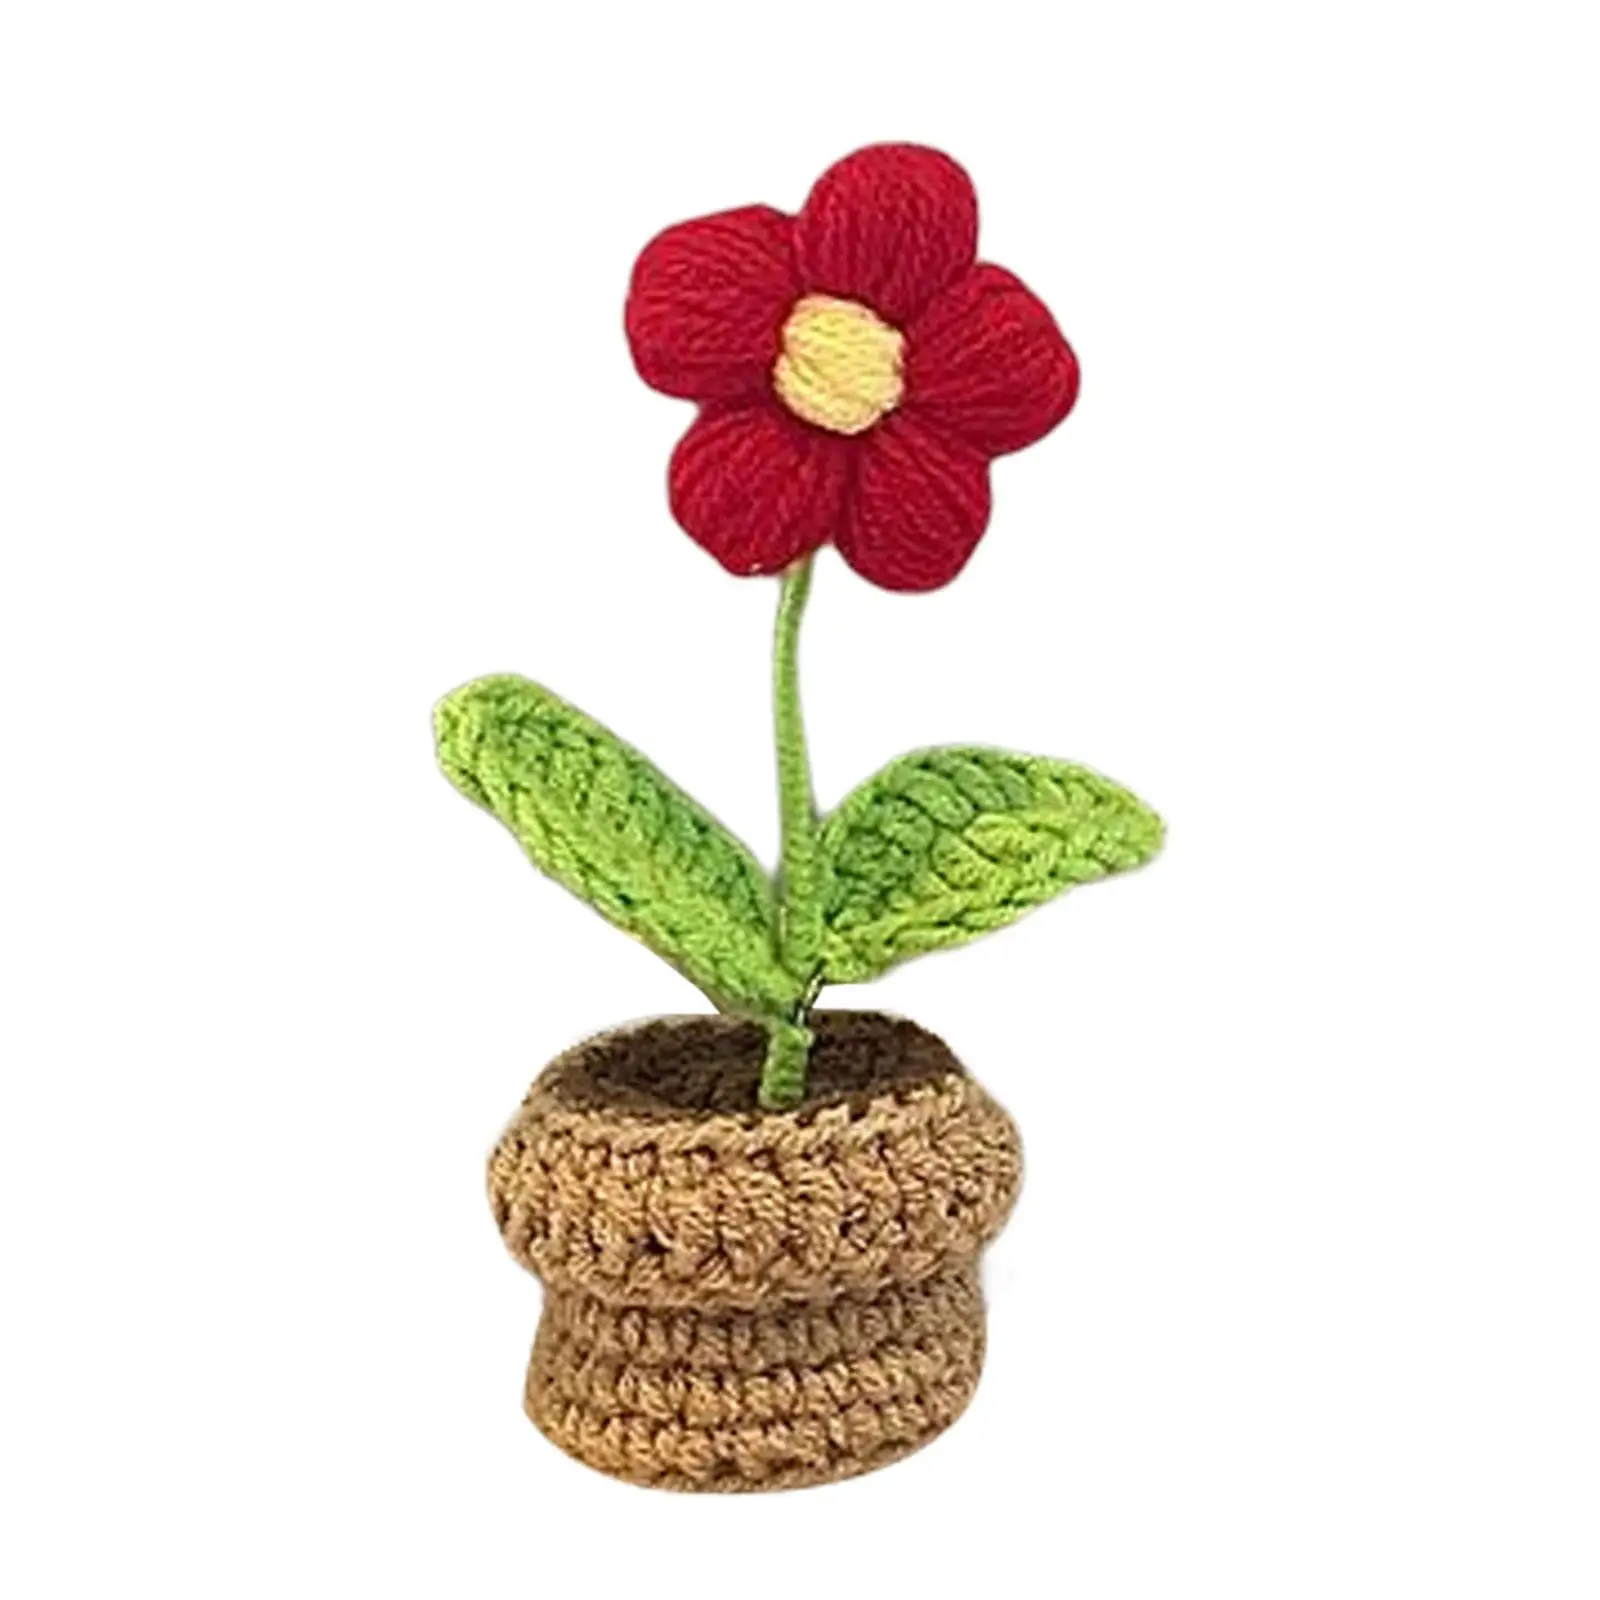  Hand Woven Knitted Flowerpot Flowers Ornament, Accessories Hand Knitting Toy